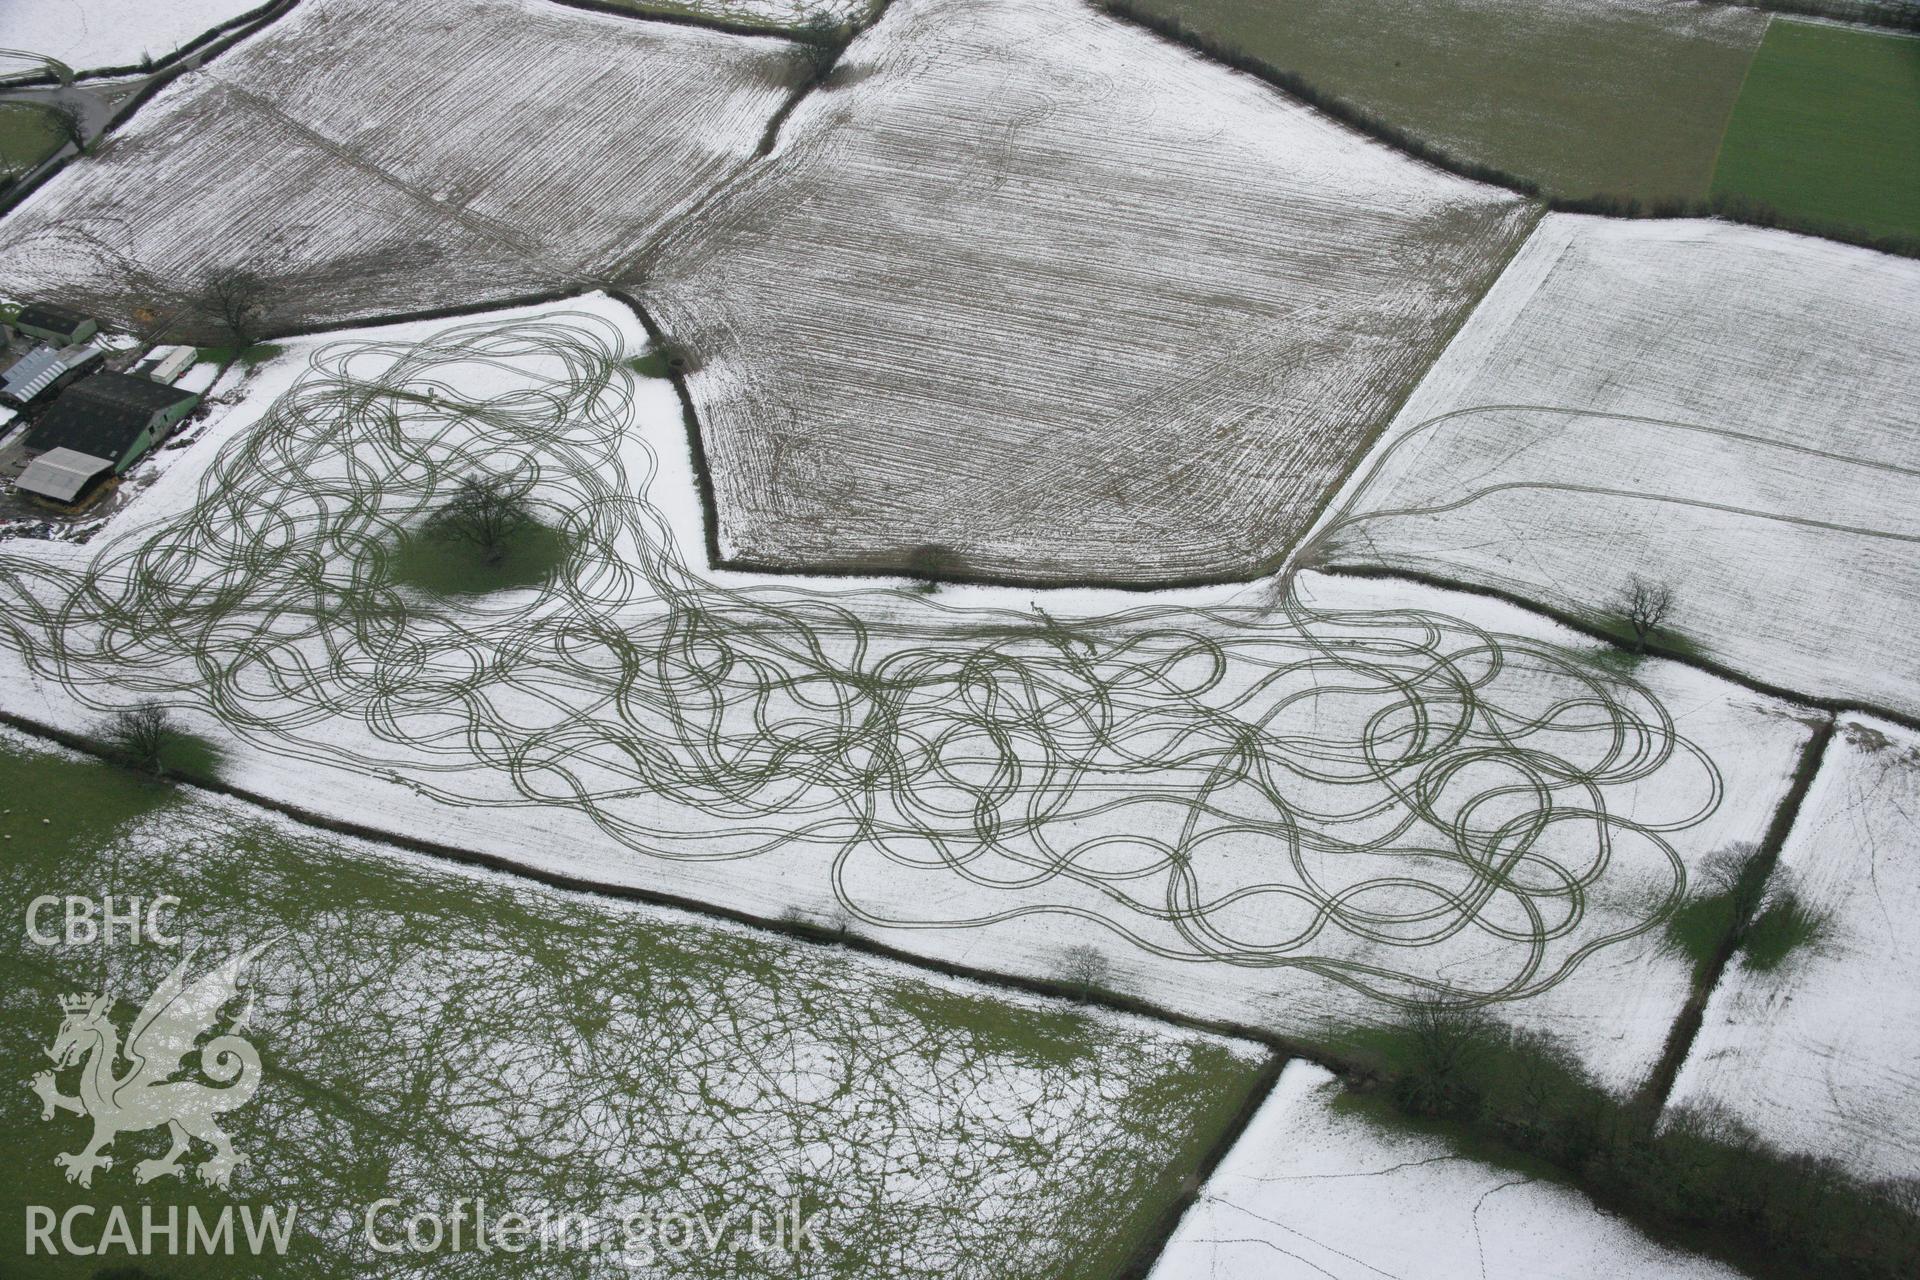 RCAHMW colour oblique aerial photograph of Tyddyn Isaf showing patterns in the snow to the north-west of the farm. Viewed from the north-east. Taken on 06 March 2006 by Toby Driver.